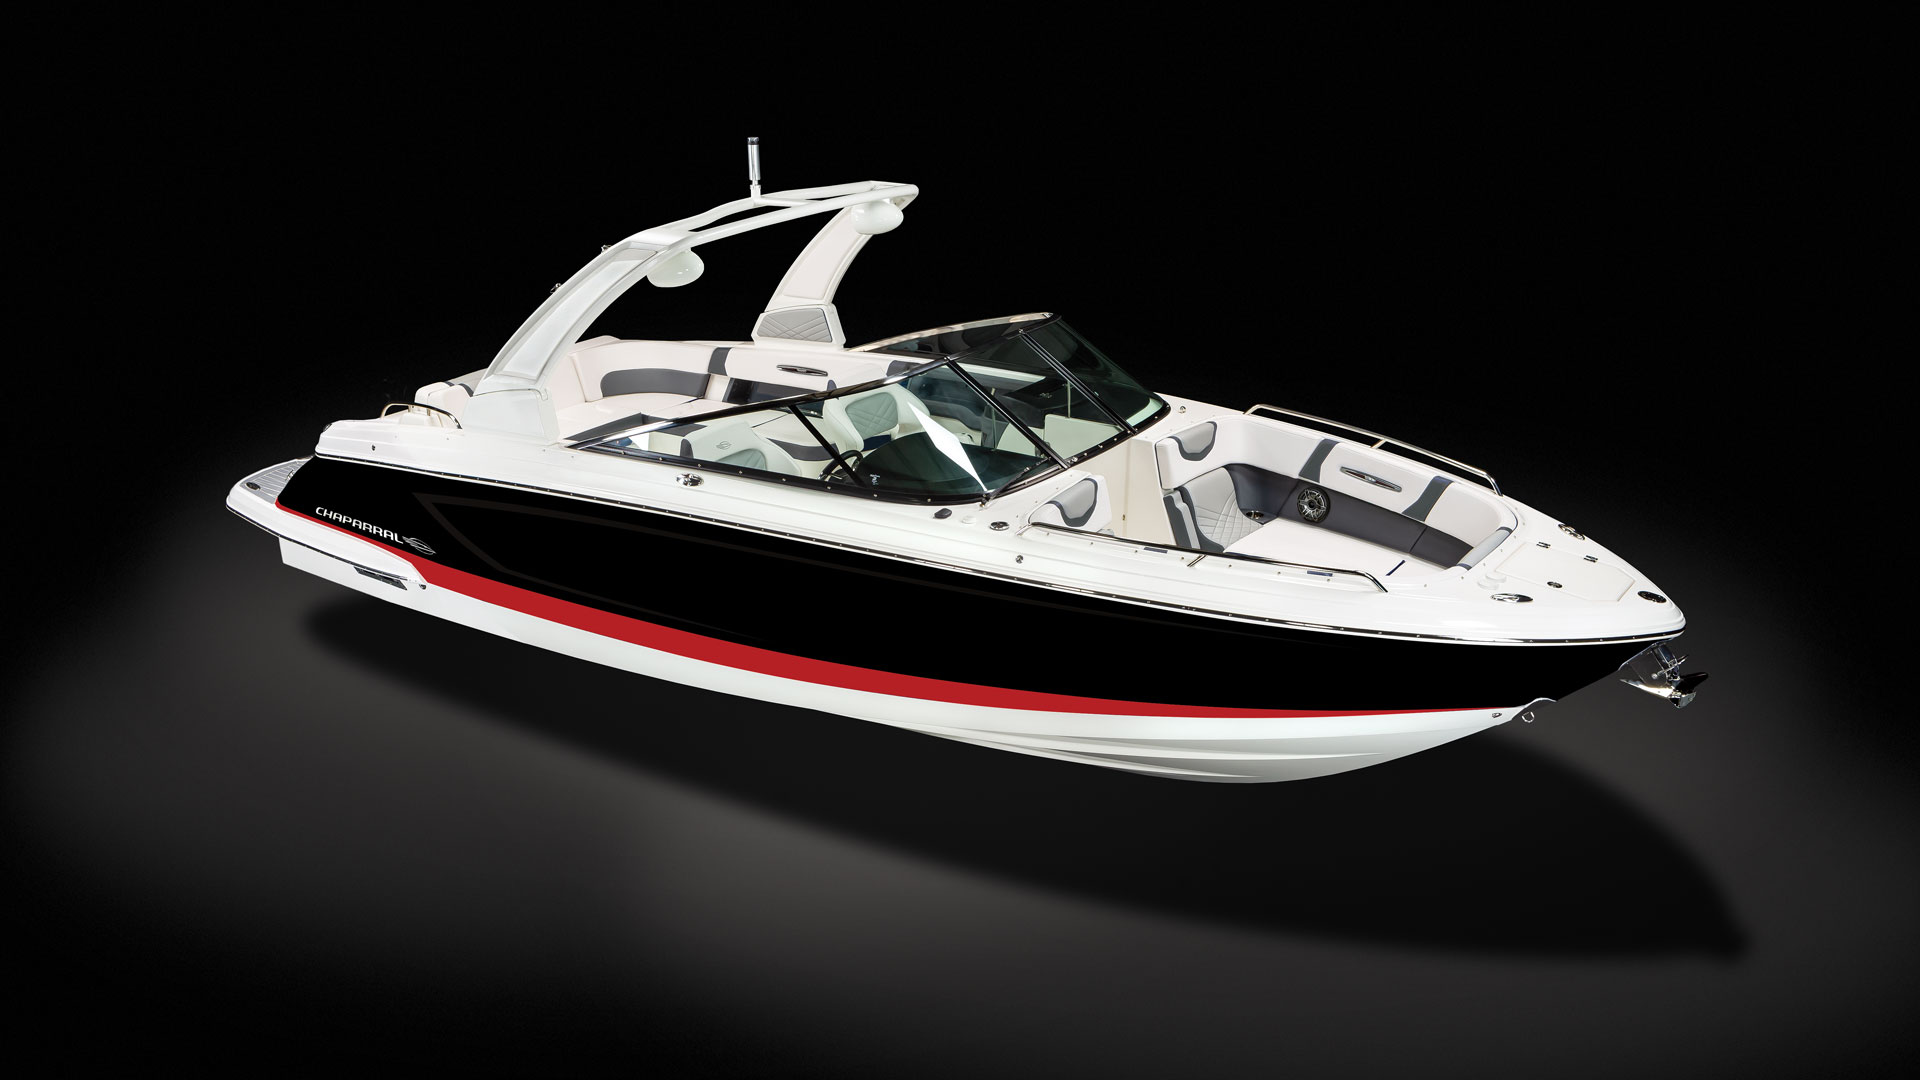 2020 297 SSX Sport Boat Features